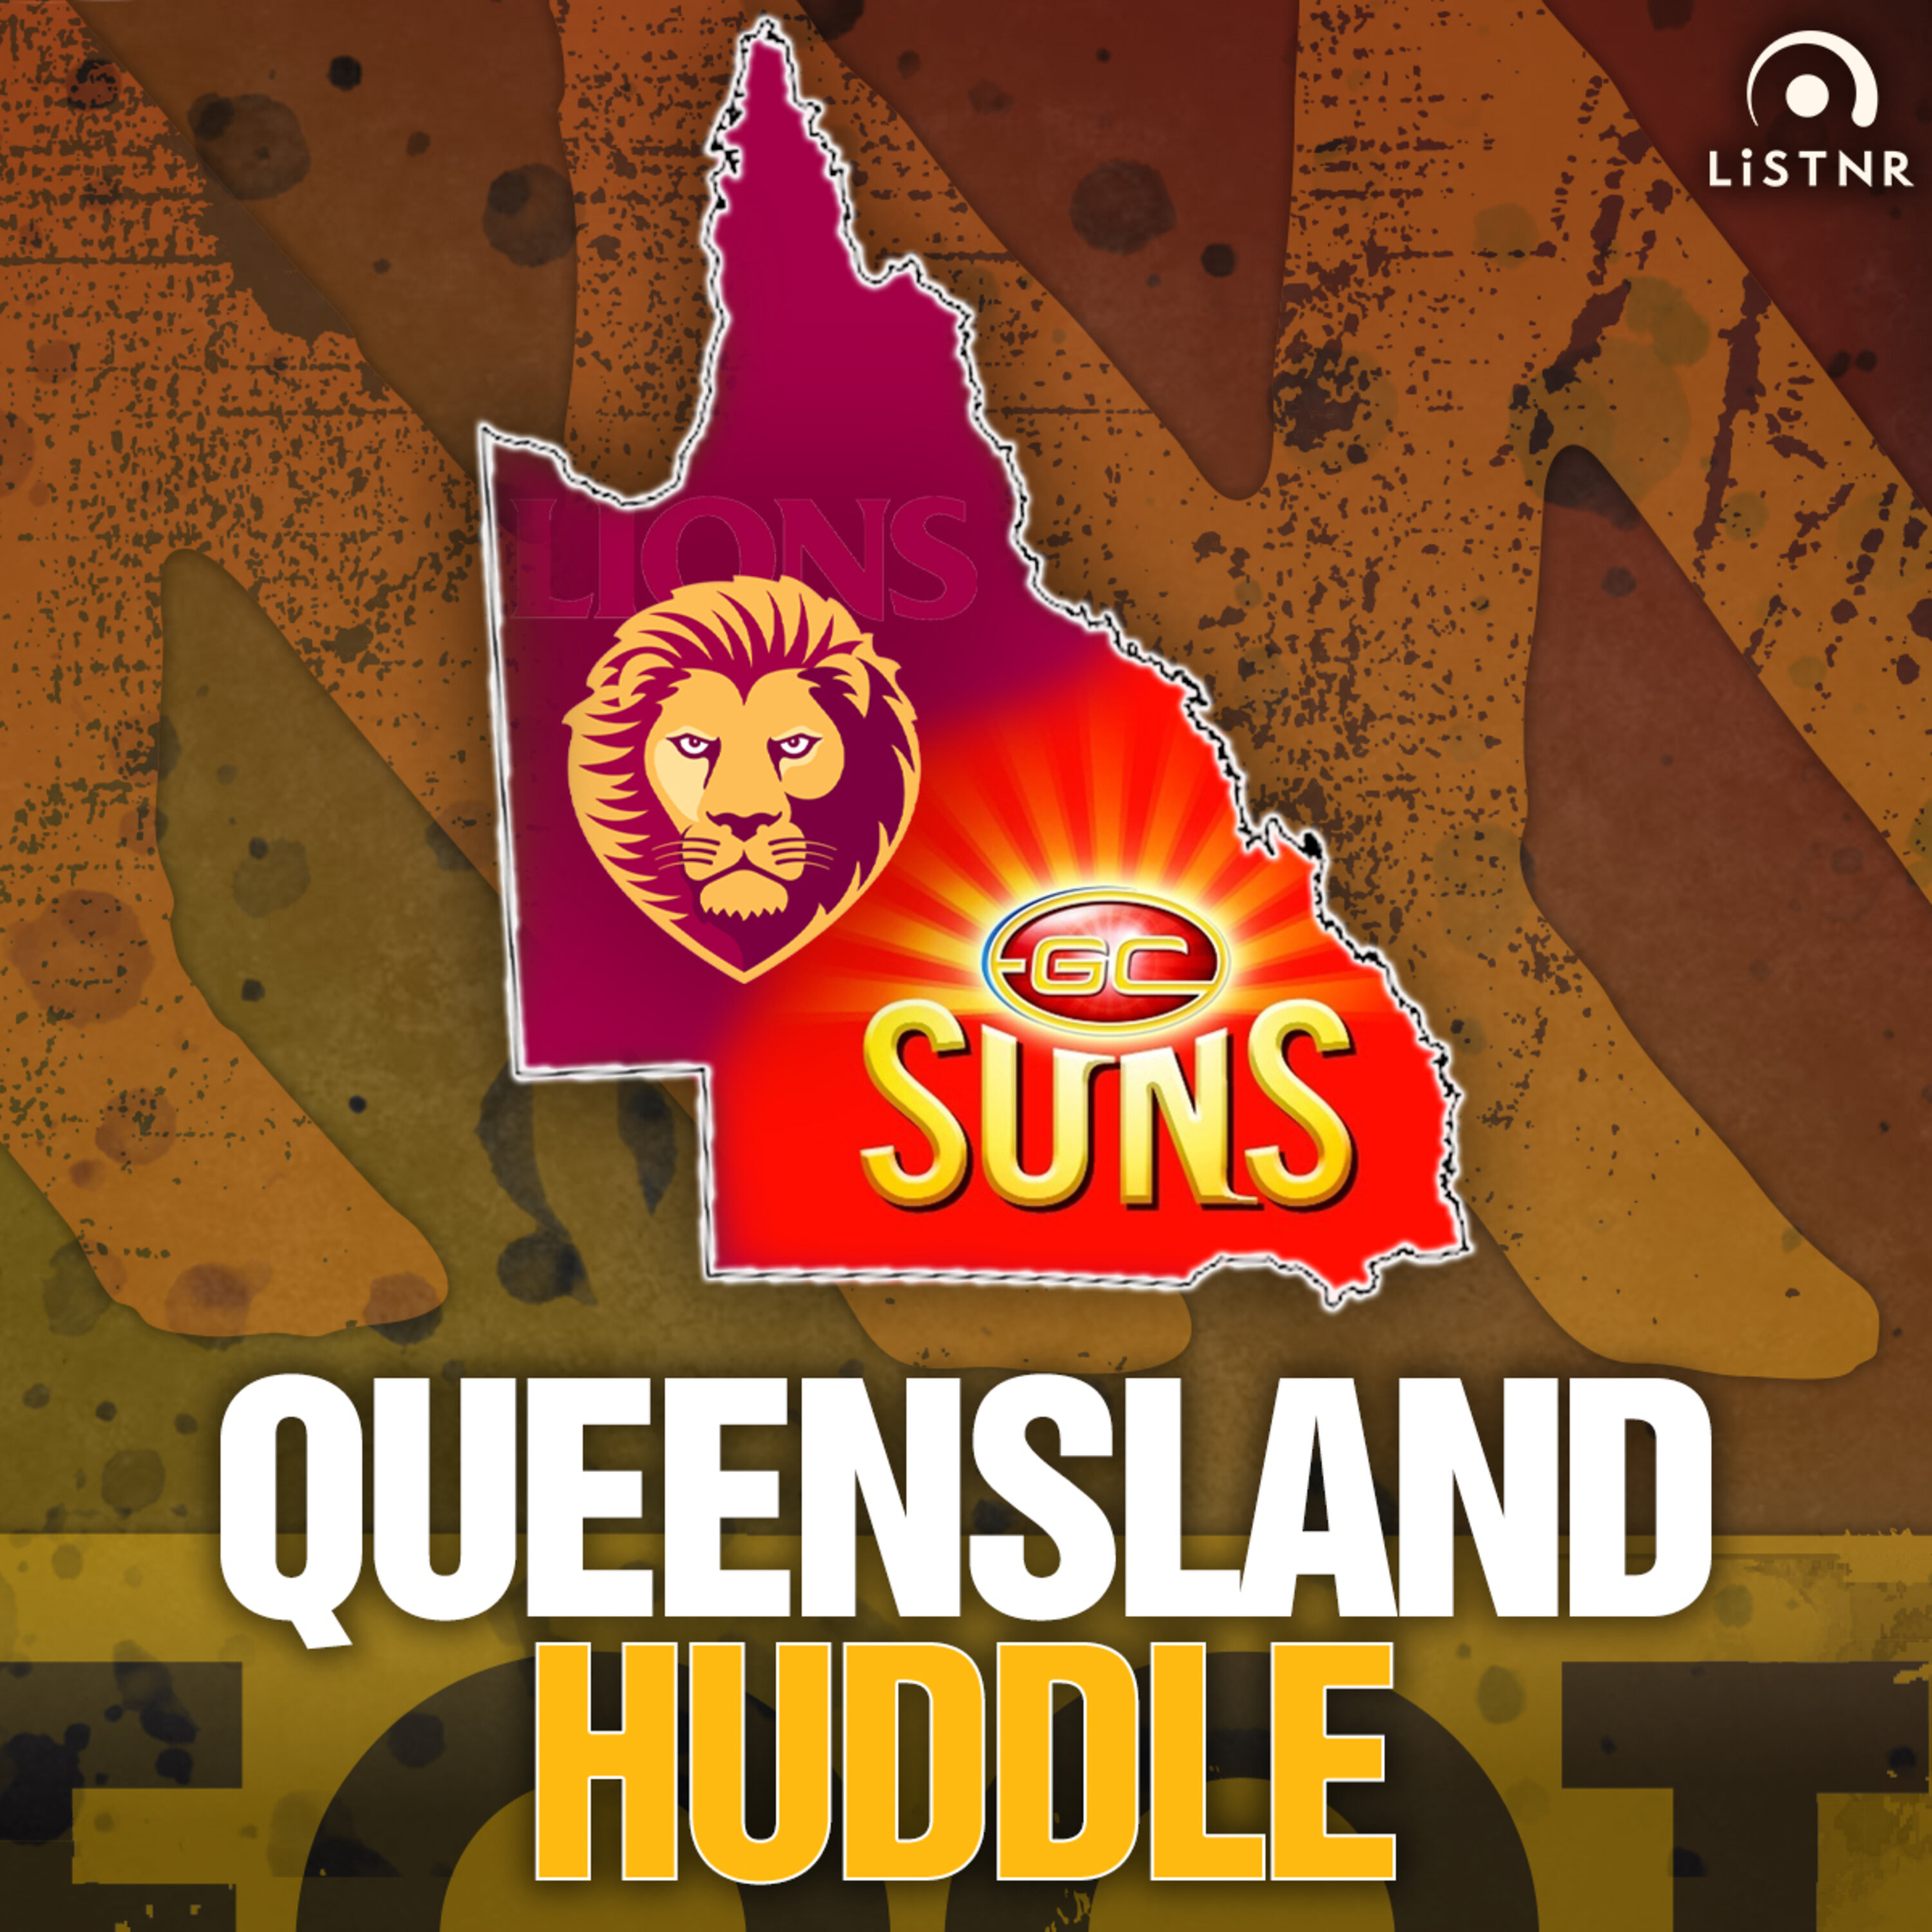 QUEENSLAND HUDDLE | The Suns' Unsung Heroes & Why The Lions Have To Own It, with Guest Host Tom Rockliff